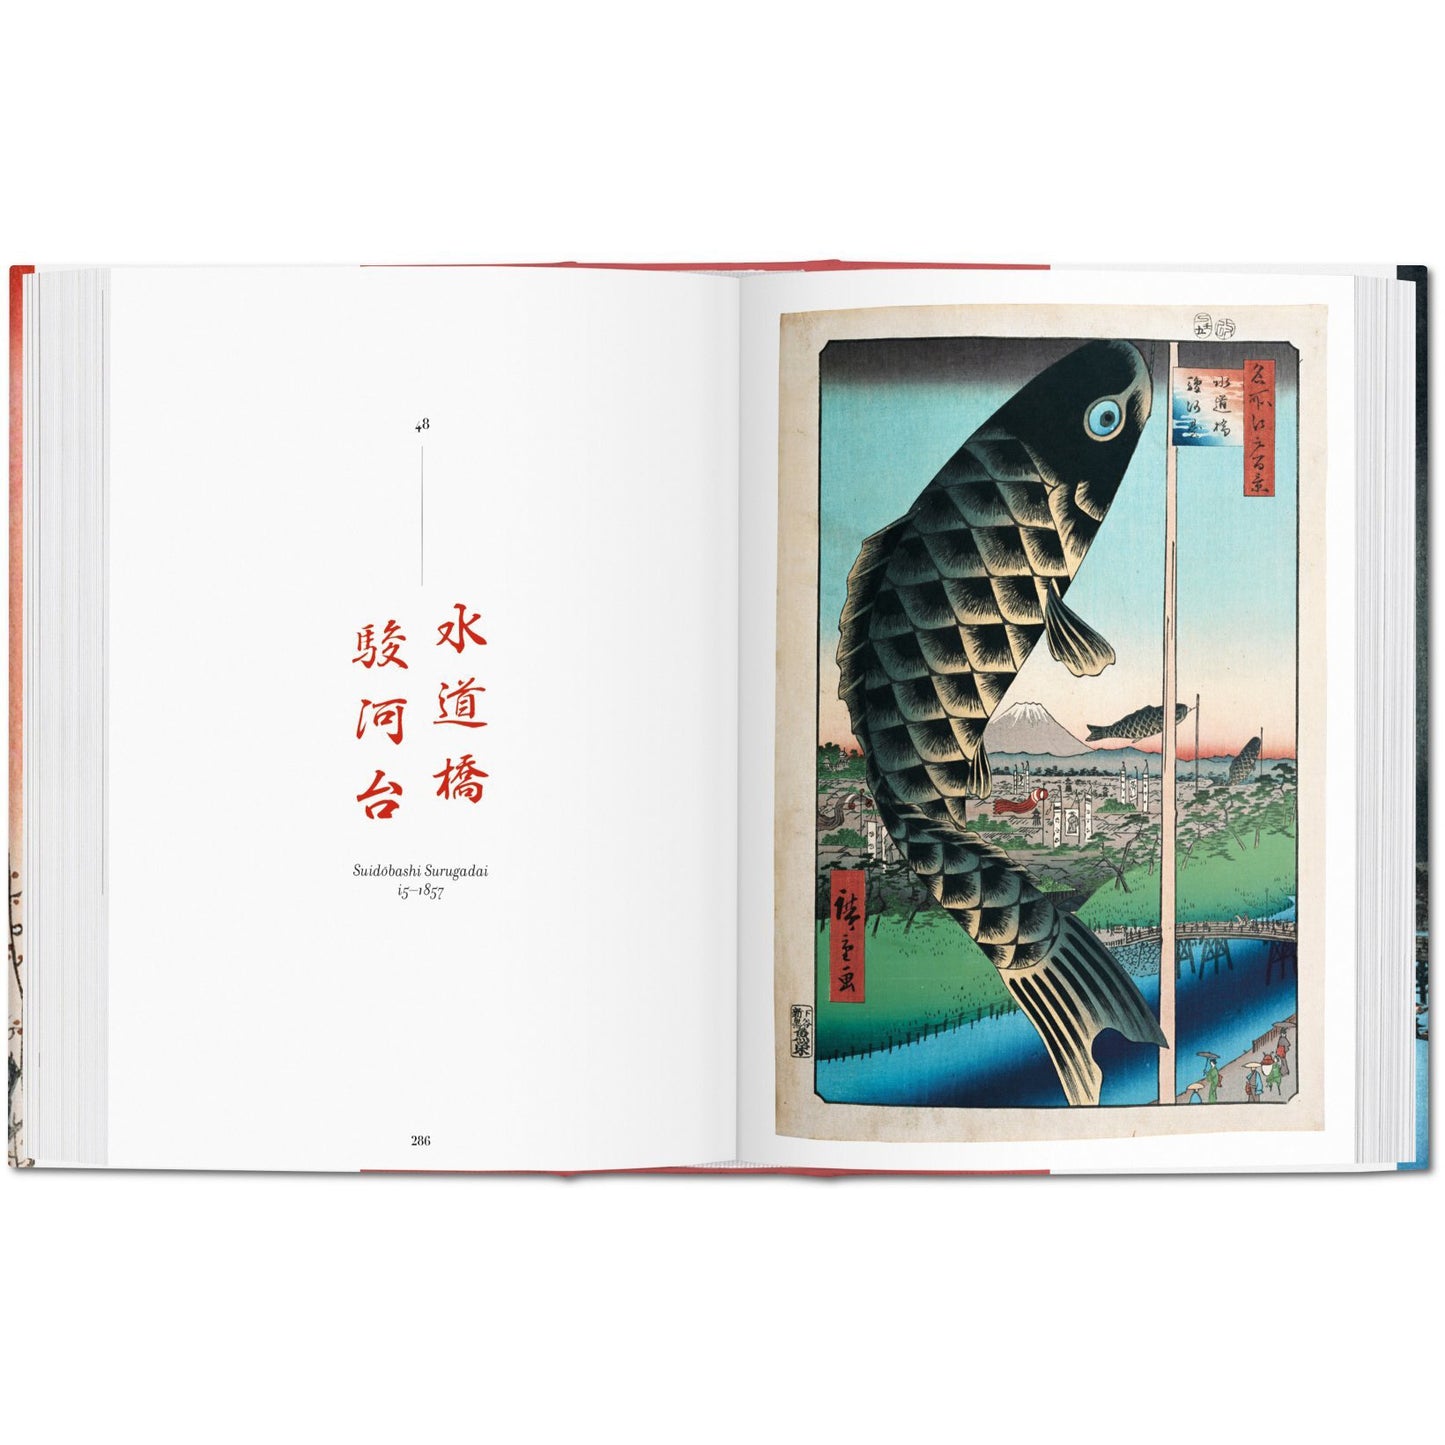 Hiroshige: One Hundred Famous Views of Edo, The Complete Plates